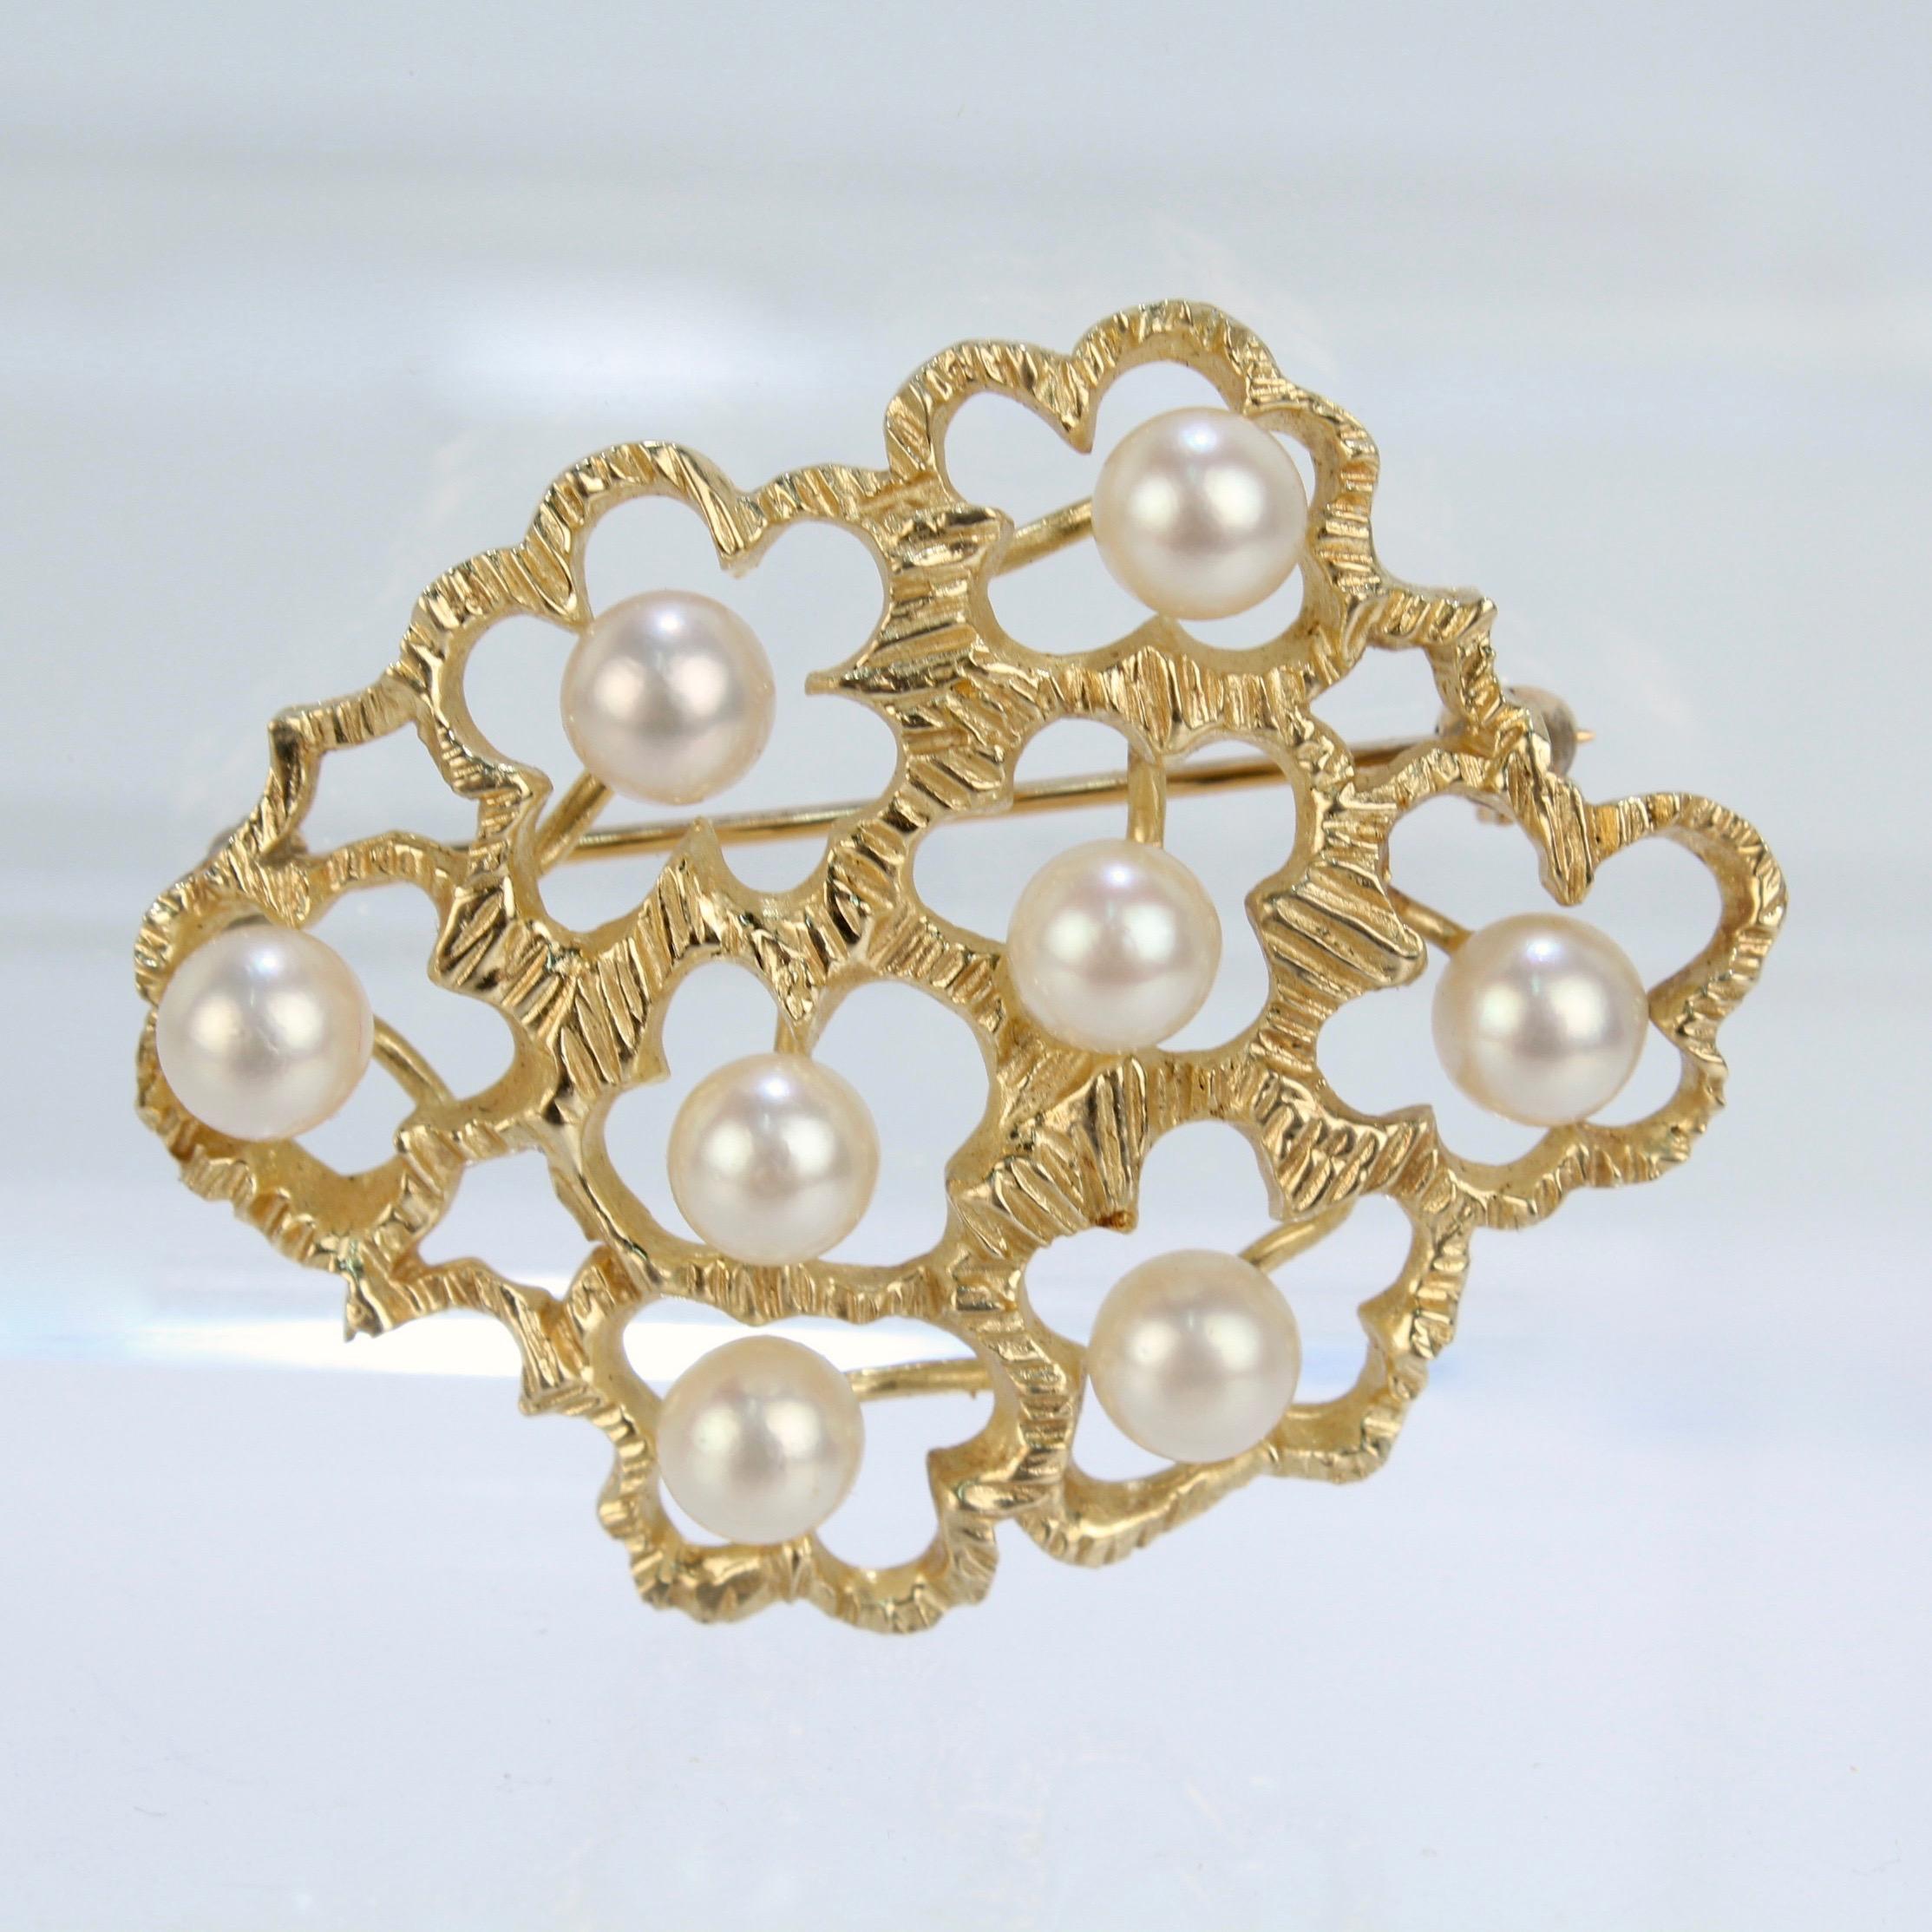 A wonderful in 14k yellow gold brooch set with 8 round, white pearls.

The brooch has a modernist design that reminiscent of a bouquet of stylized multi-petal flowers each with a pearl at their center.

Marked on the reverse 14k for